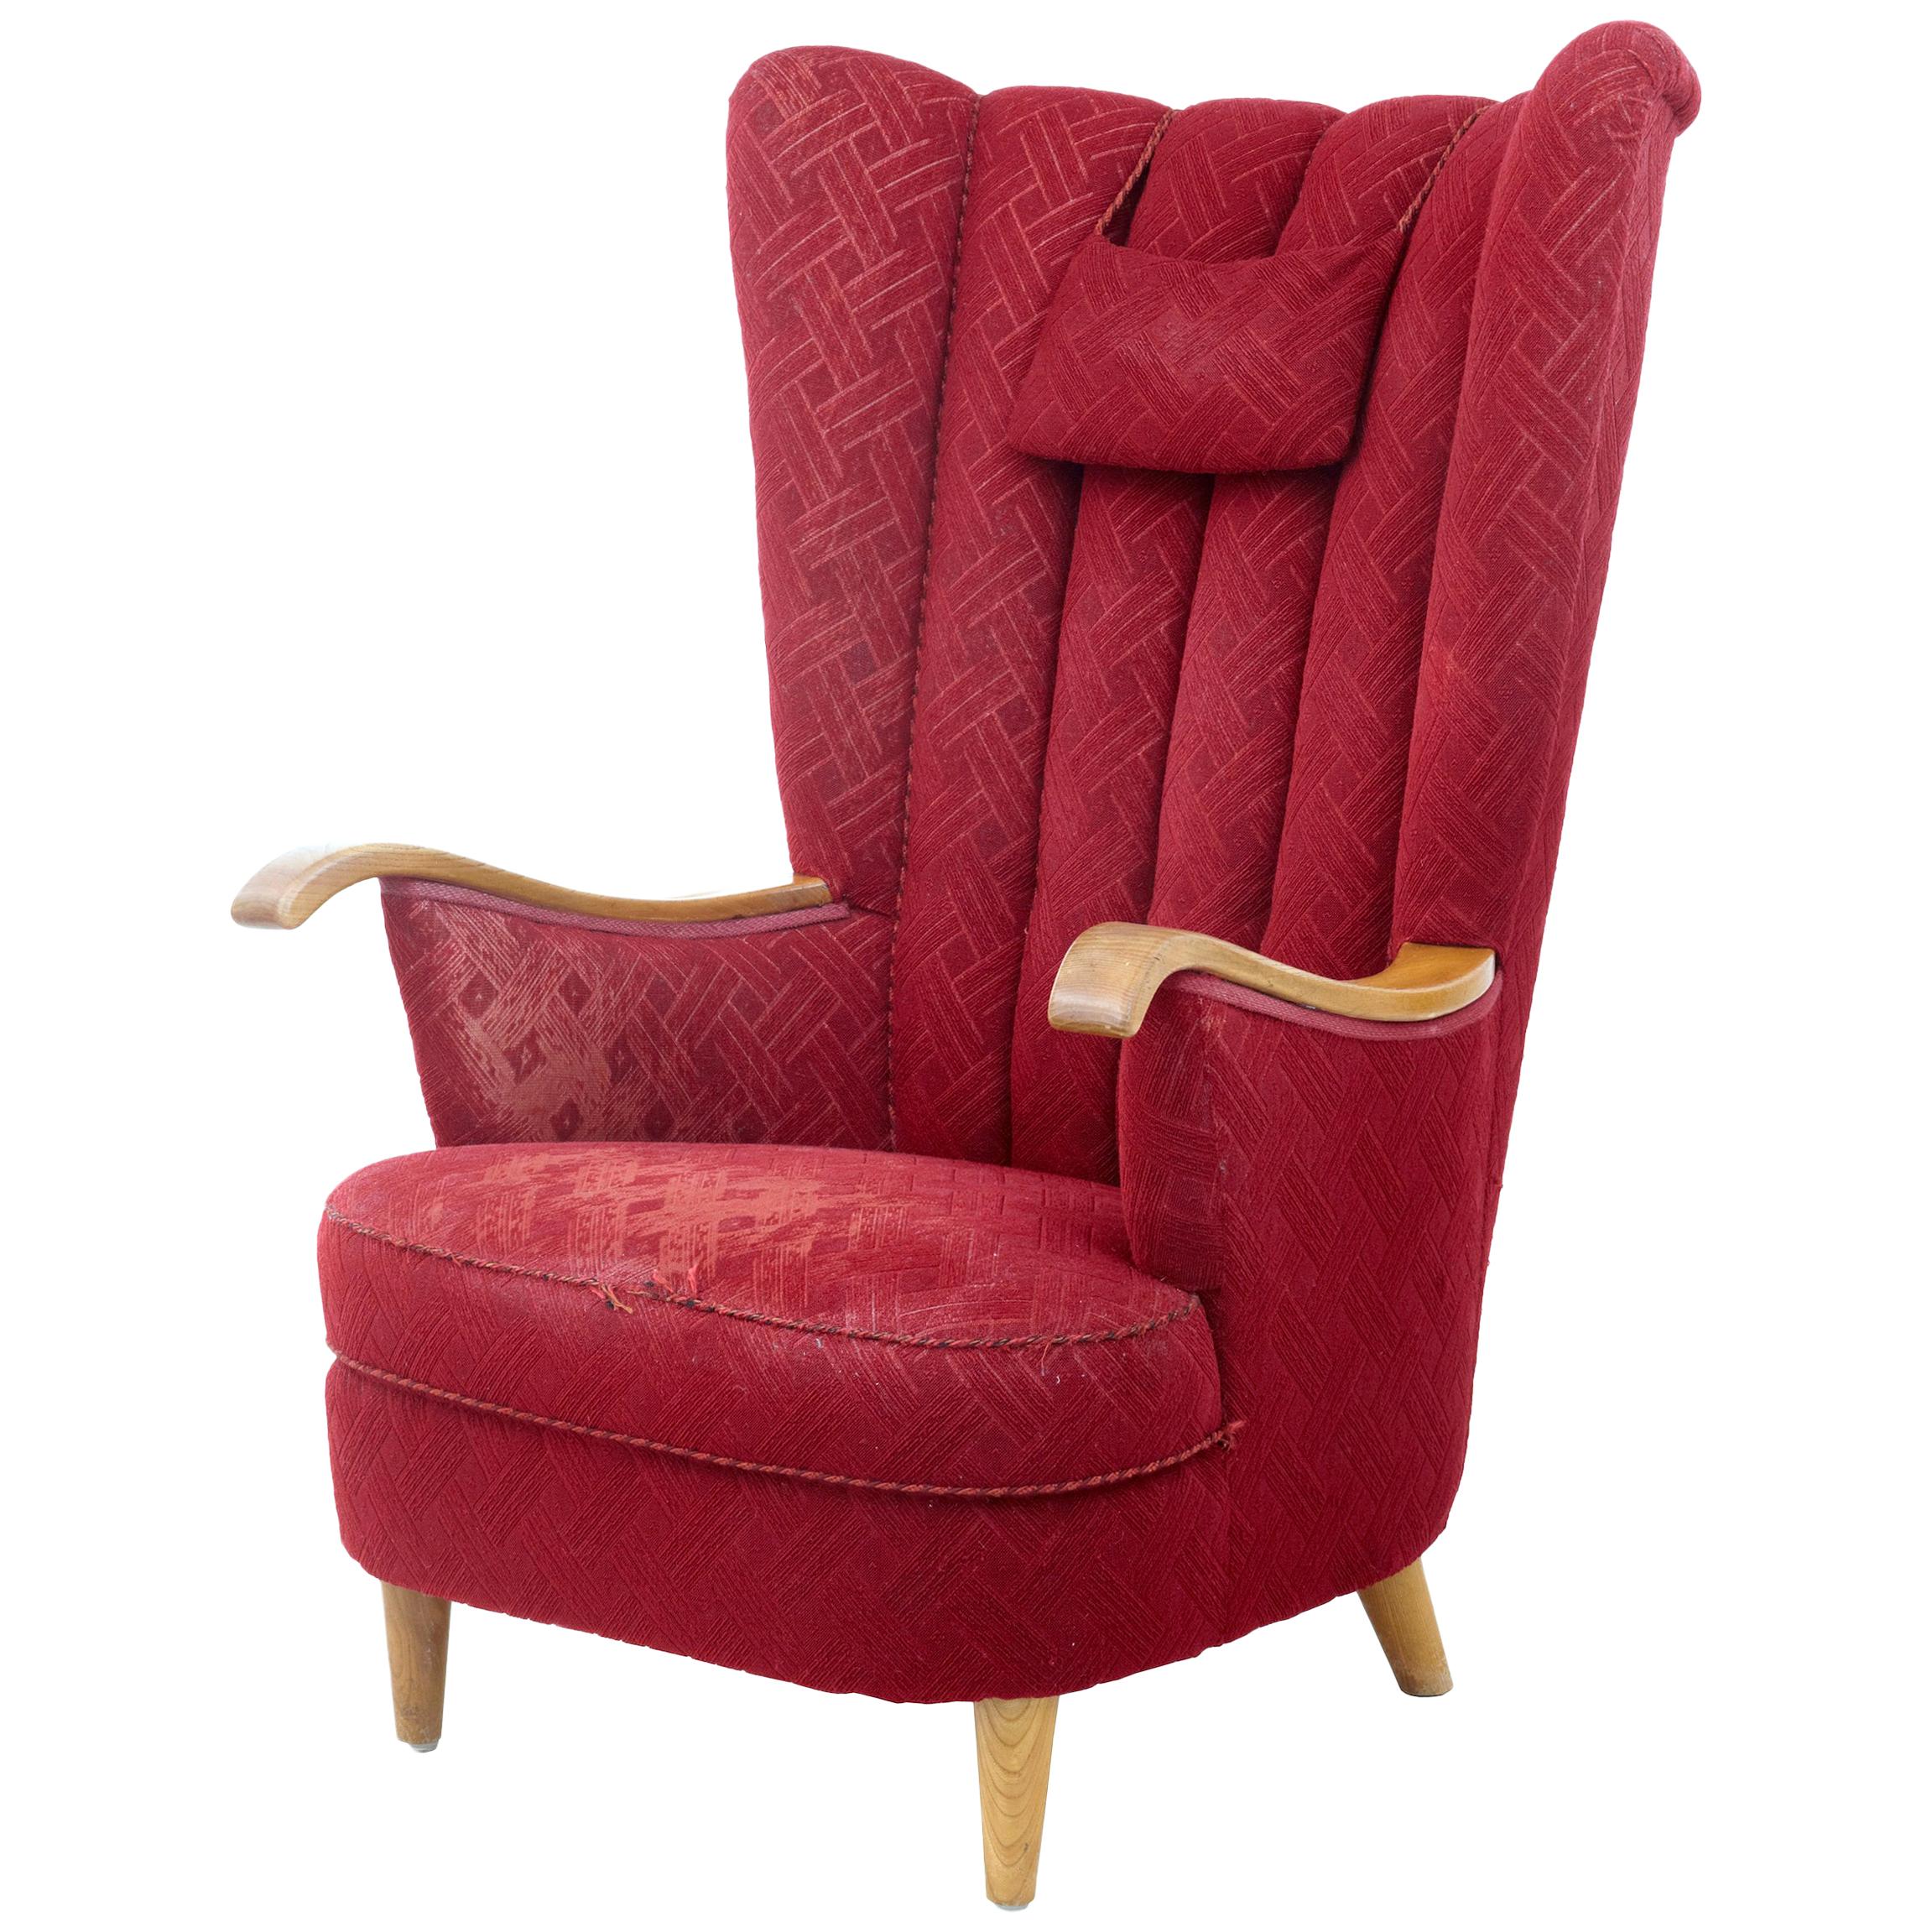 Mid-20th Century Deco Inspired Shell Back Armchair For Sale at 1stDibs